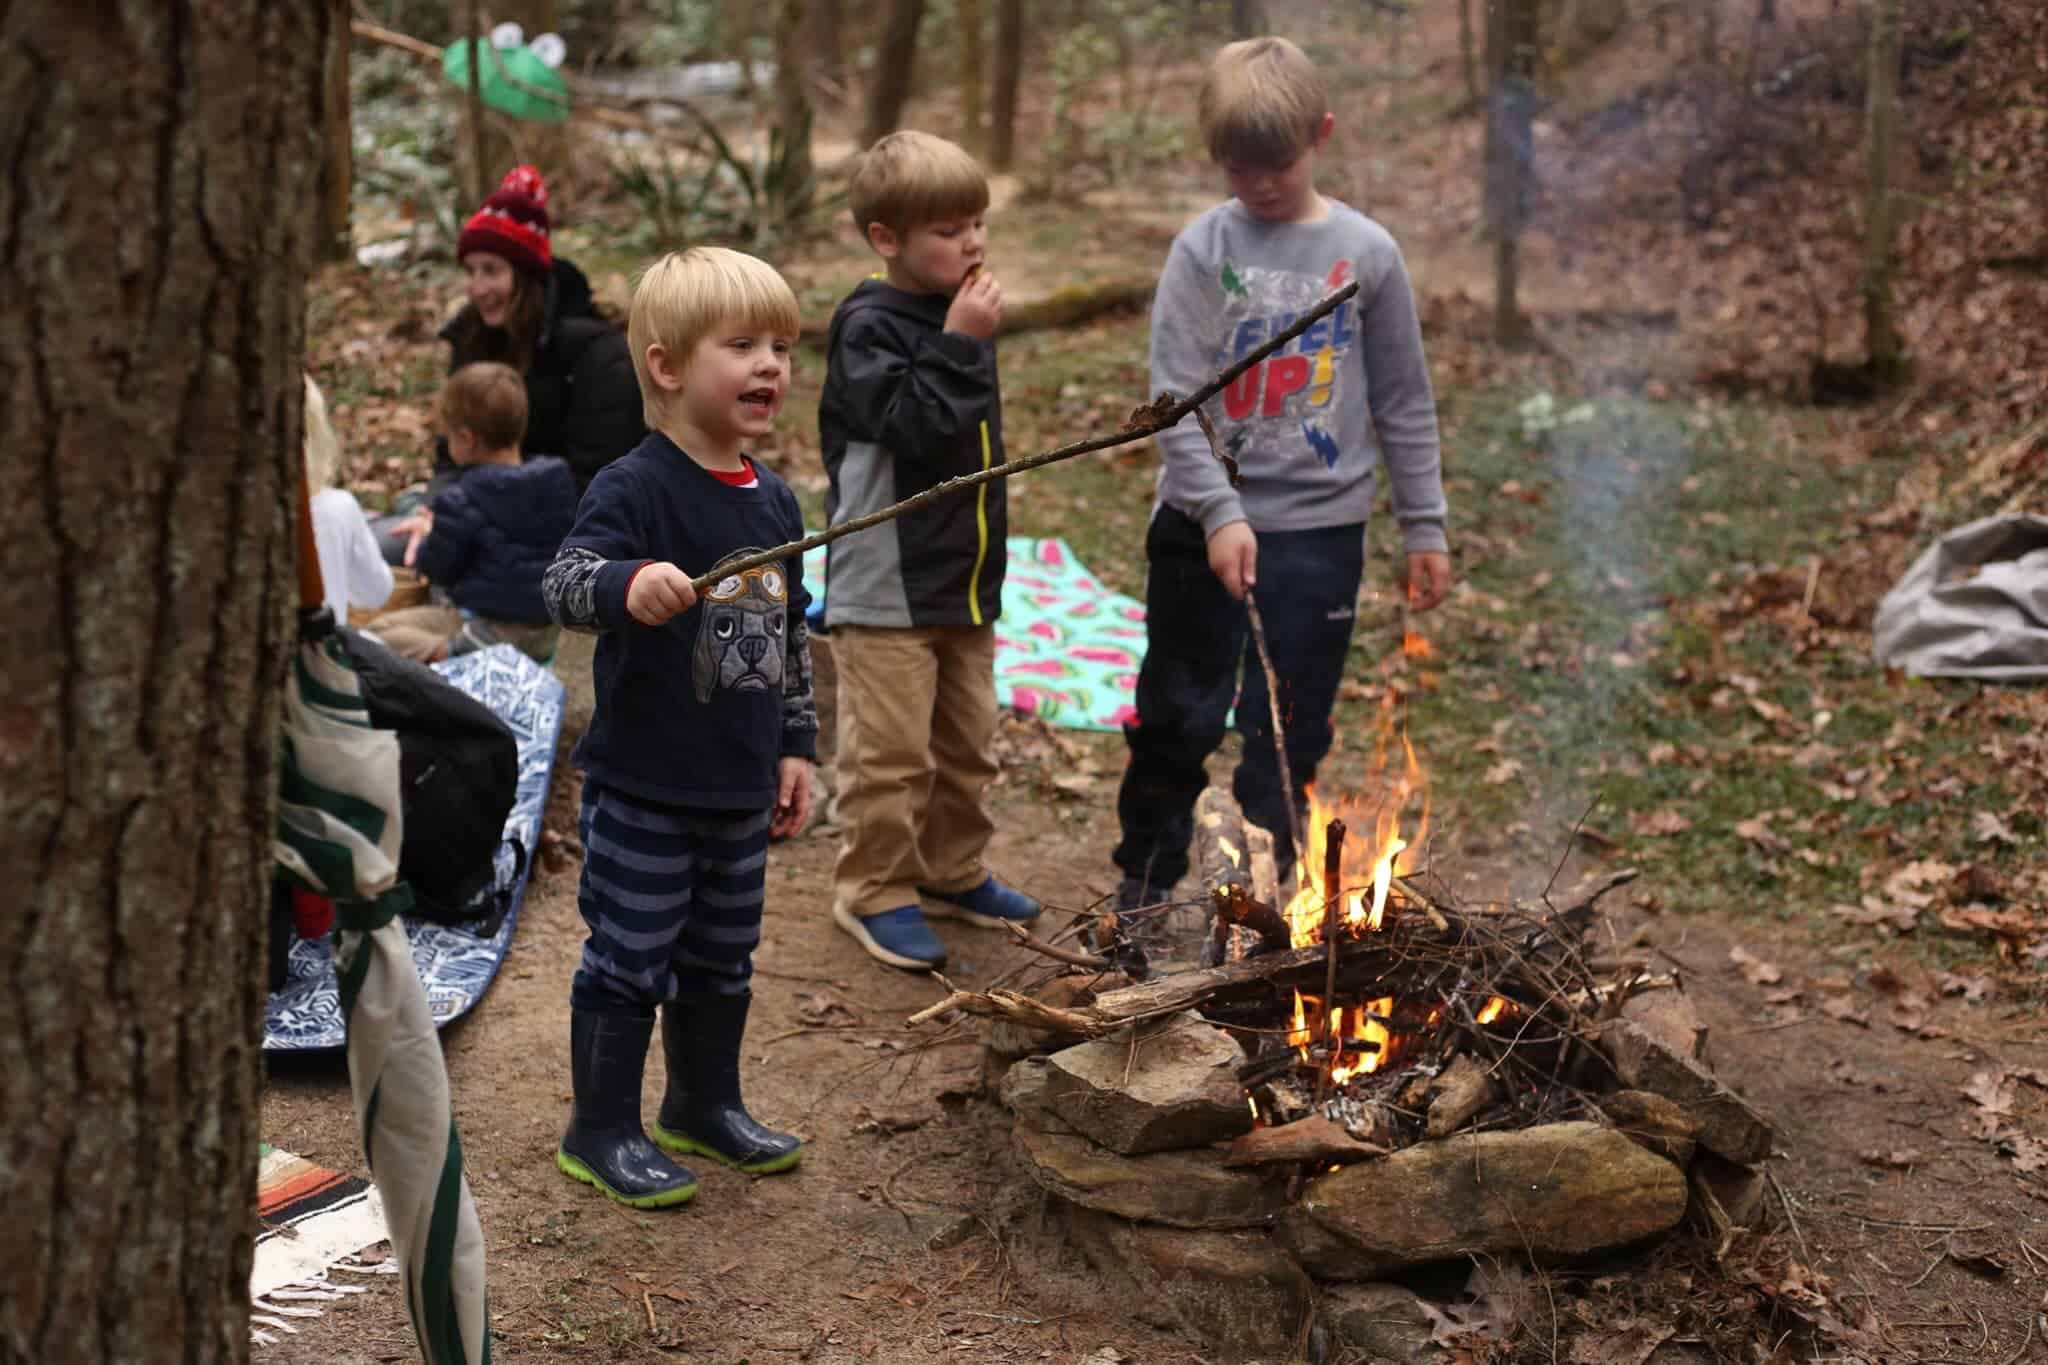 Fire Building and Campfire Safety Tips for Kids